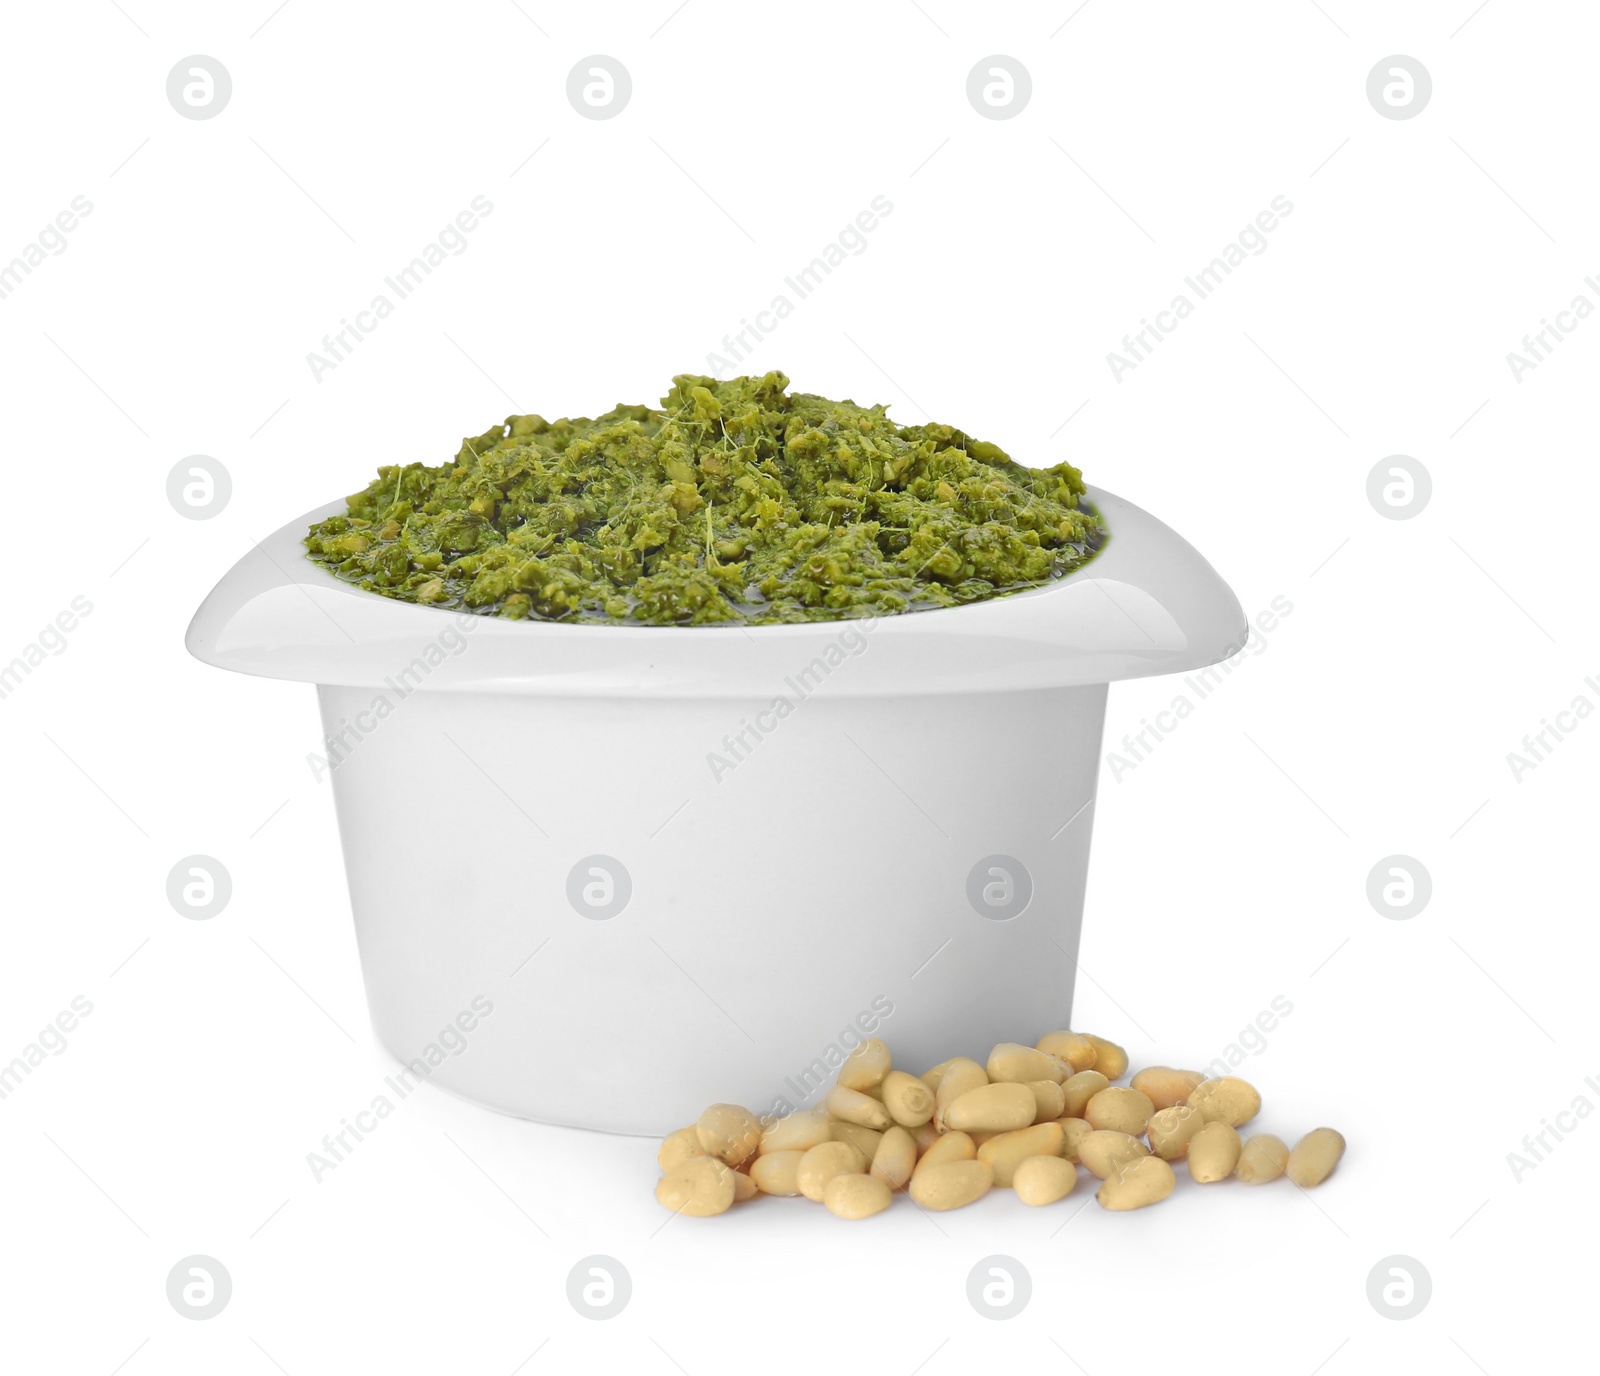 Photo of Delicious pesto sauce in bowl and pile of pine nuts isolated on white